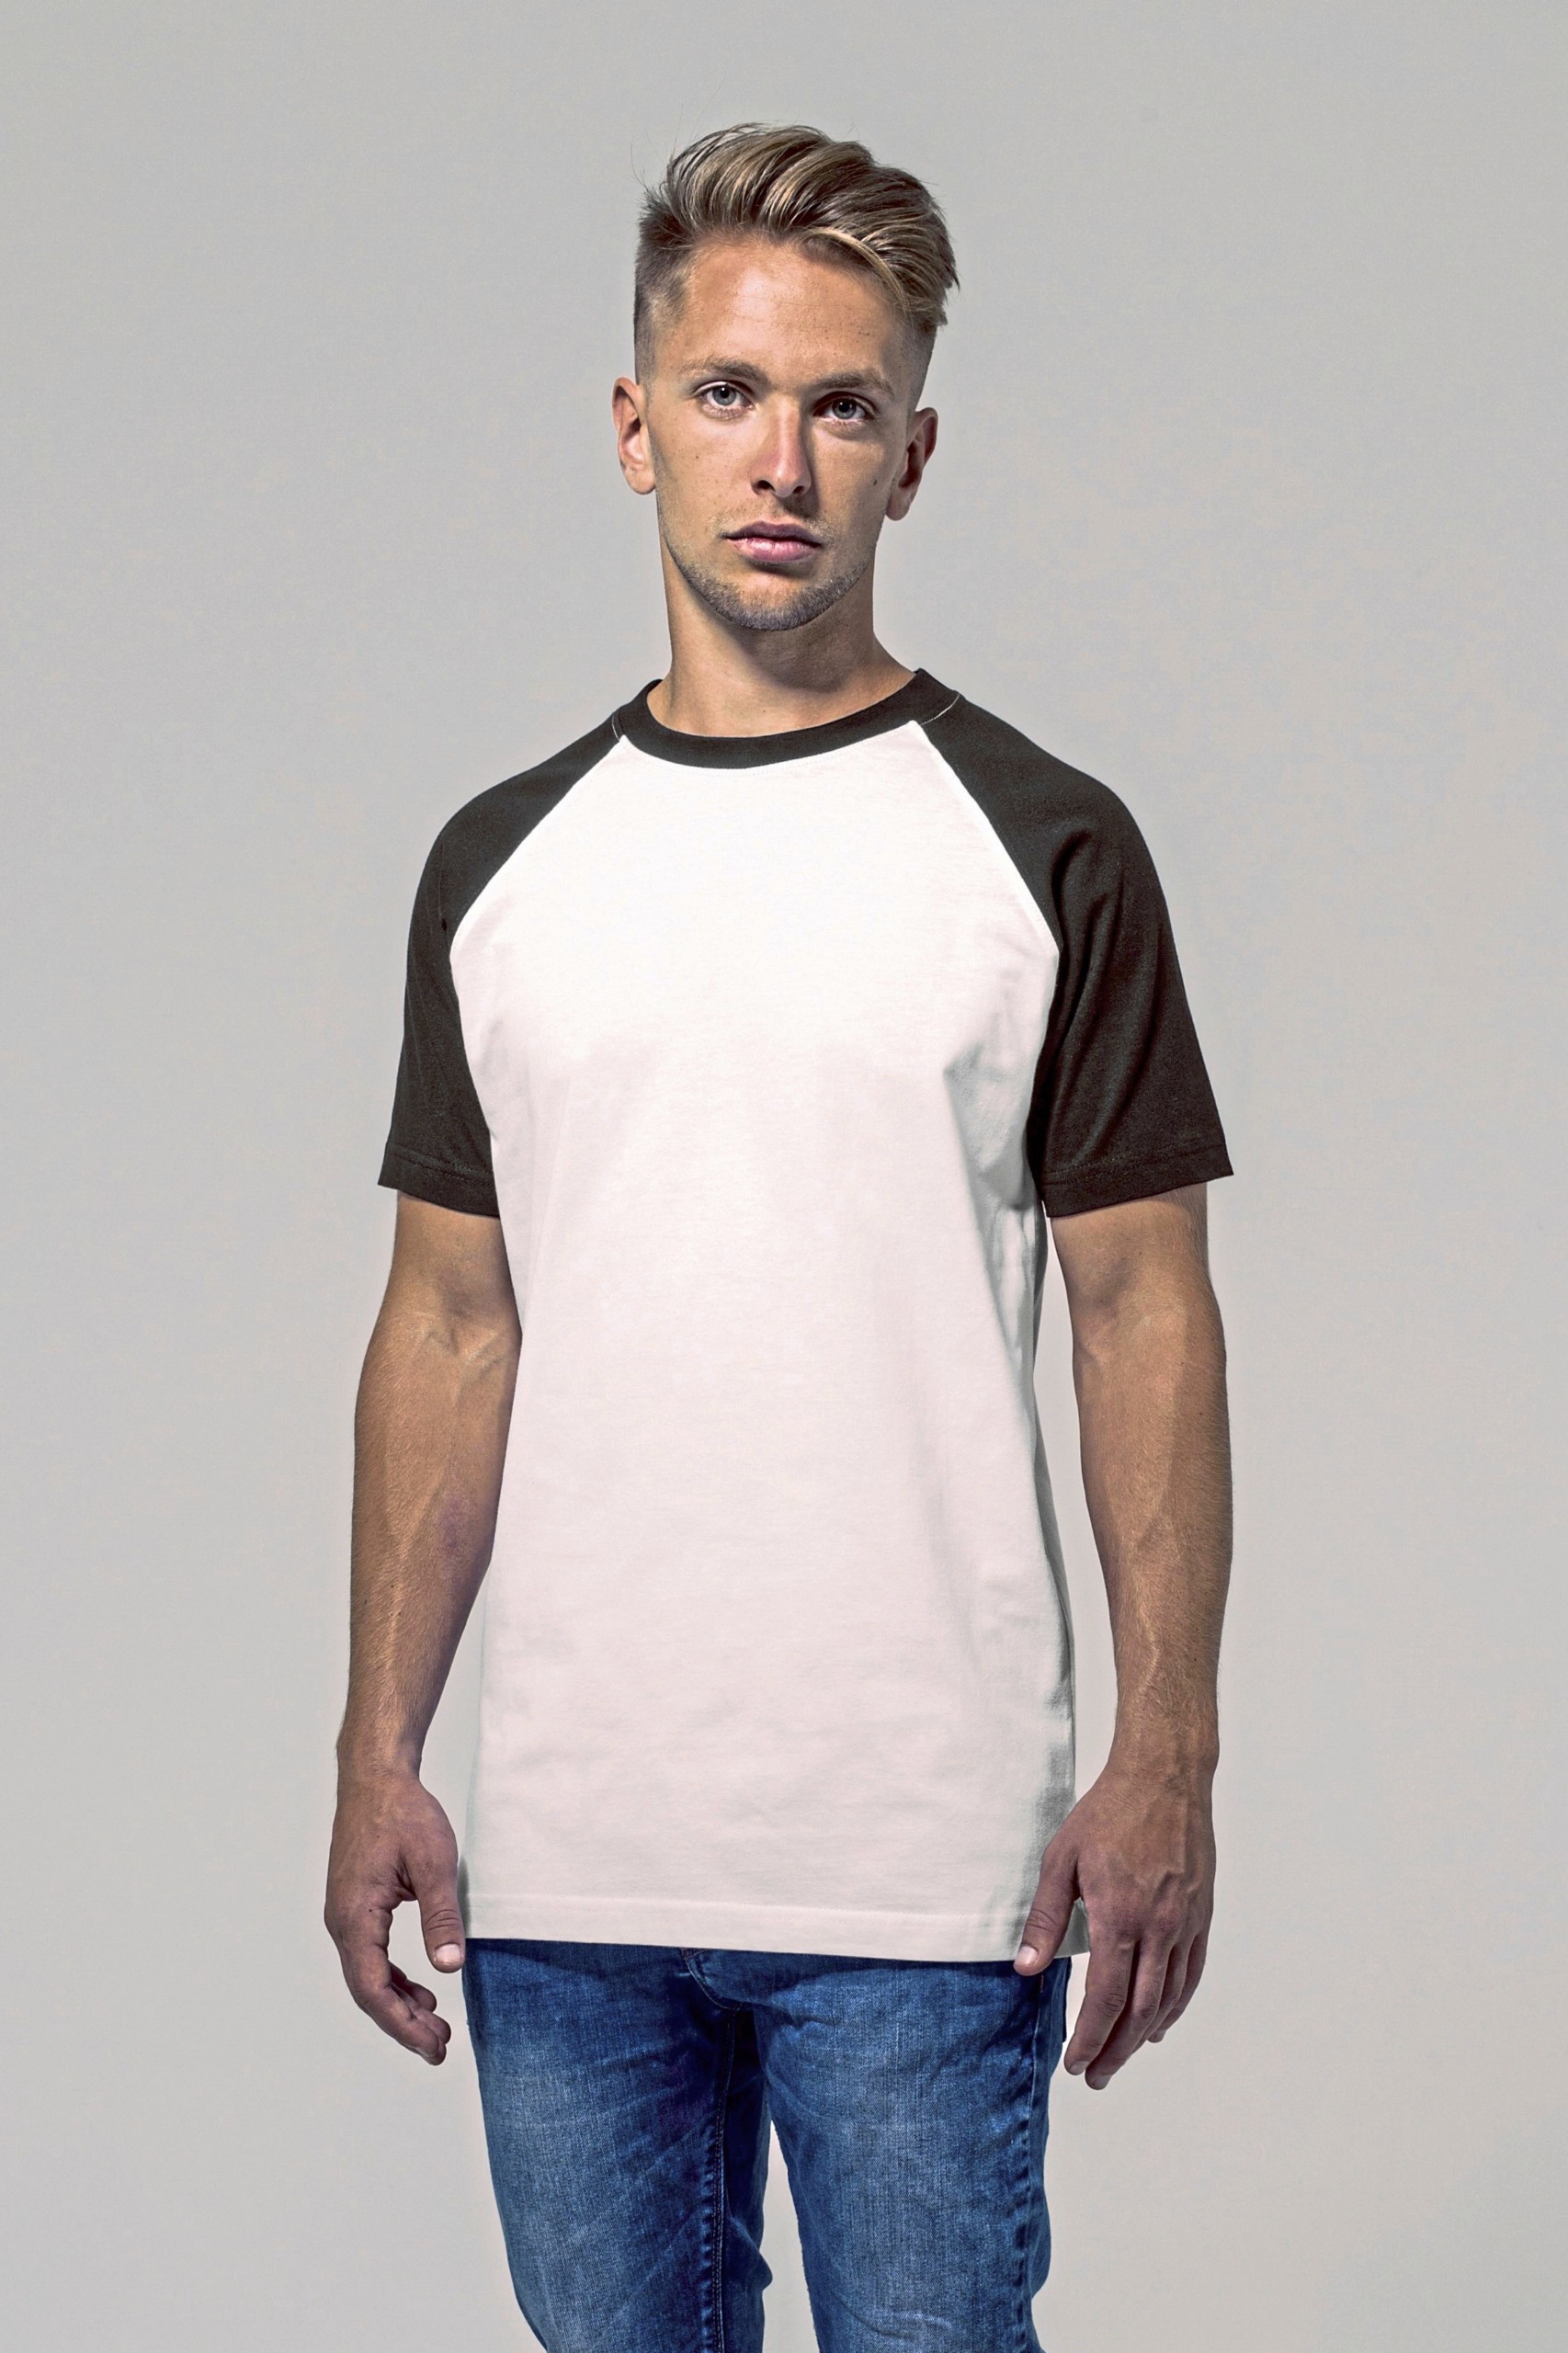 T-Shirts - Build Your Brand - Raglan Contrast Tee - BY007